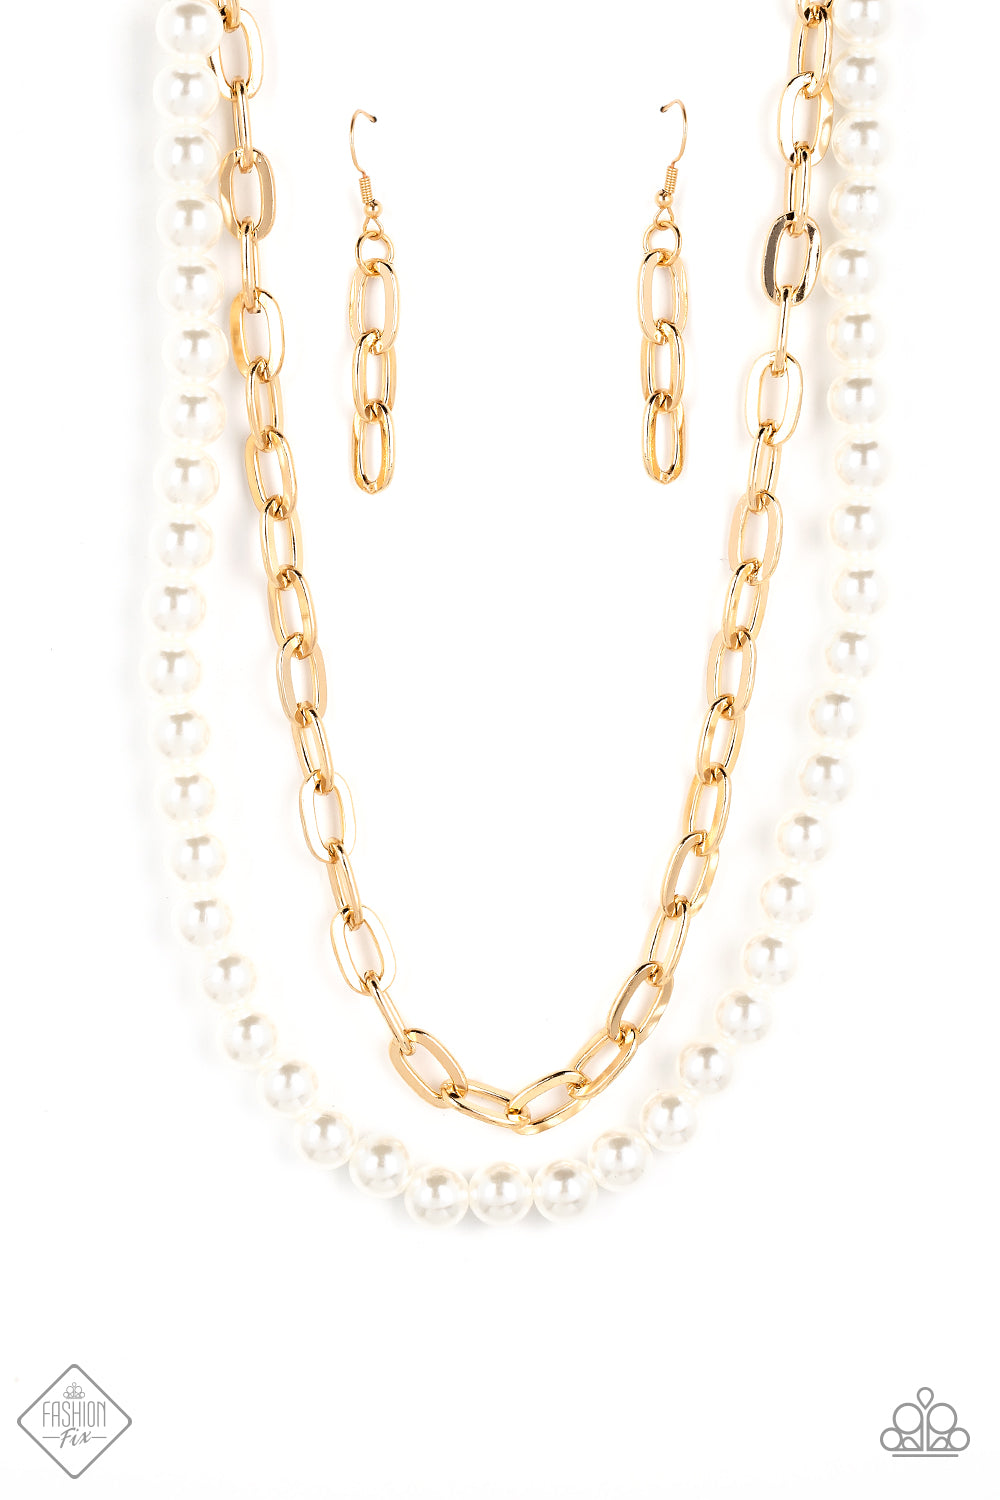 Paparazzi Suburban Yacht Club Gold Short Necklace - Fashion Fix Fiercely 5th Avenue October 2022